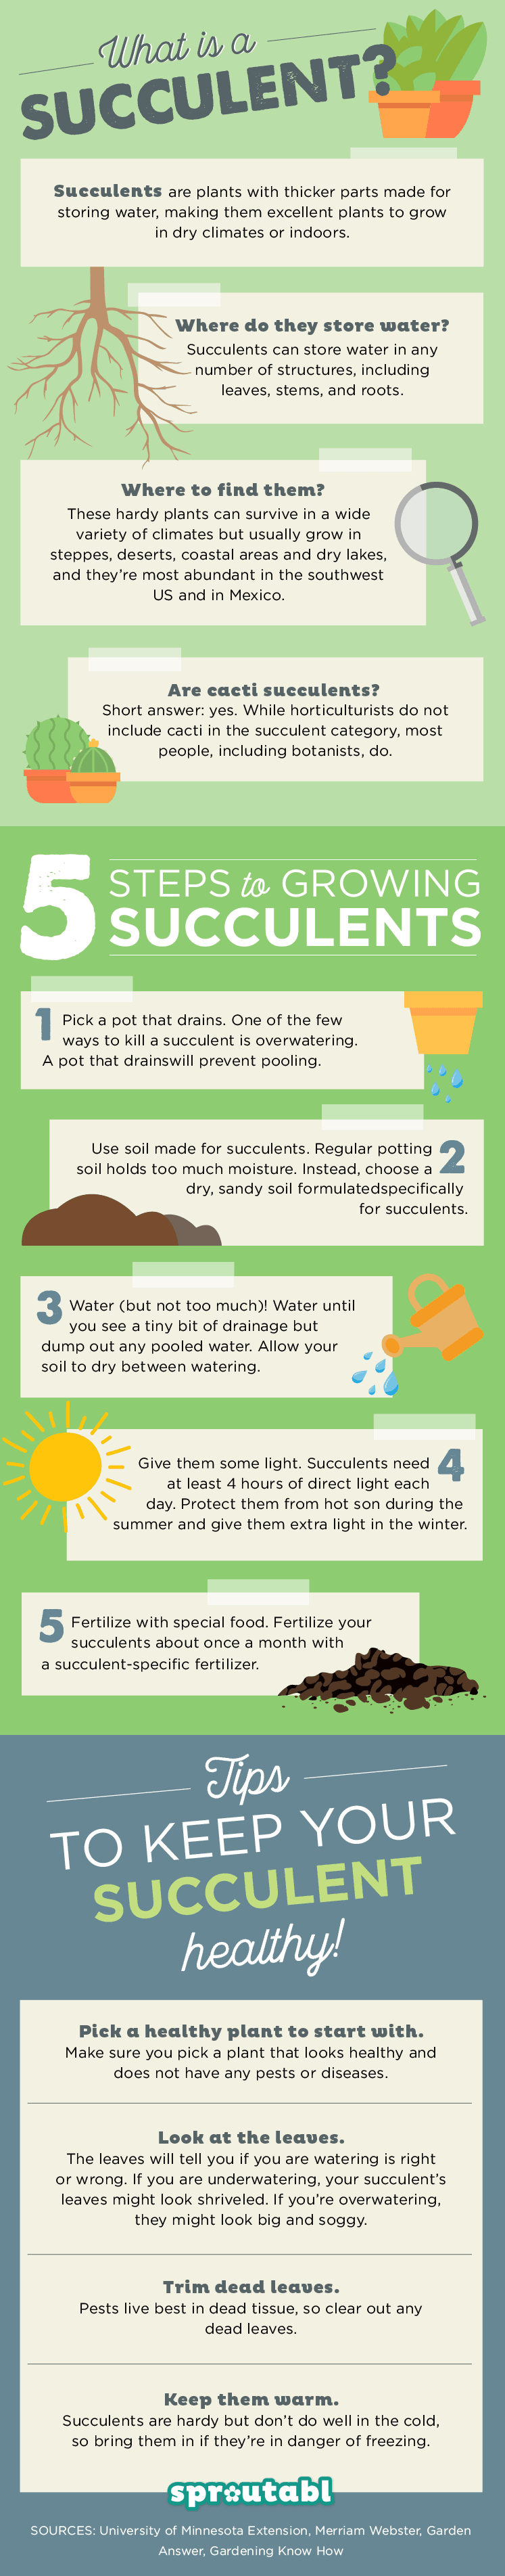 http://www.prettyprudent.com/wp-content/uploads/2017/04/How-to-Grow-Succulents.png